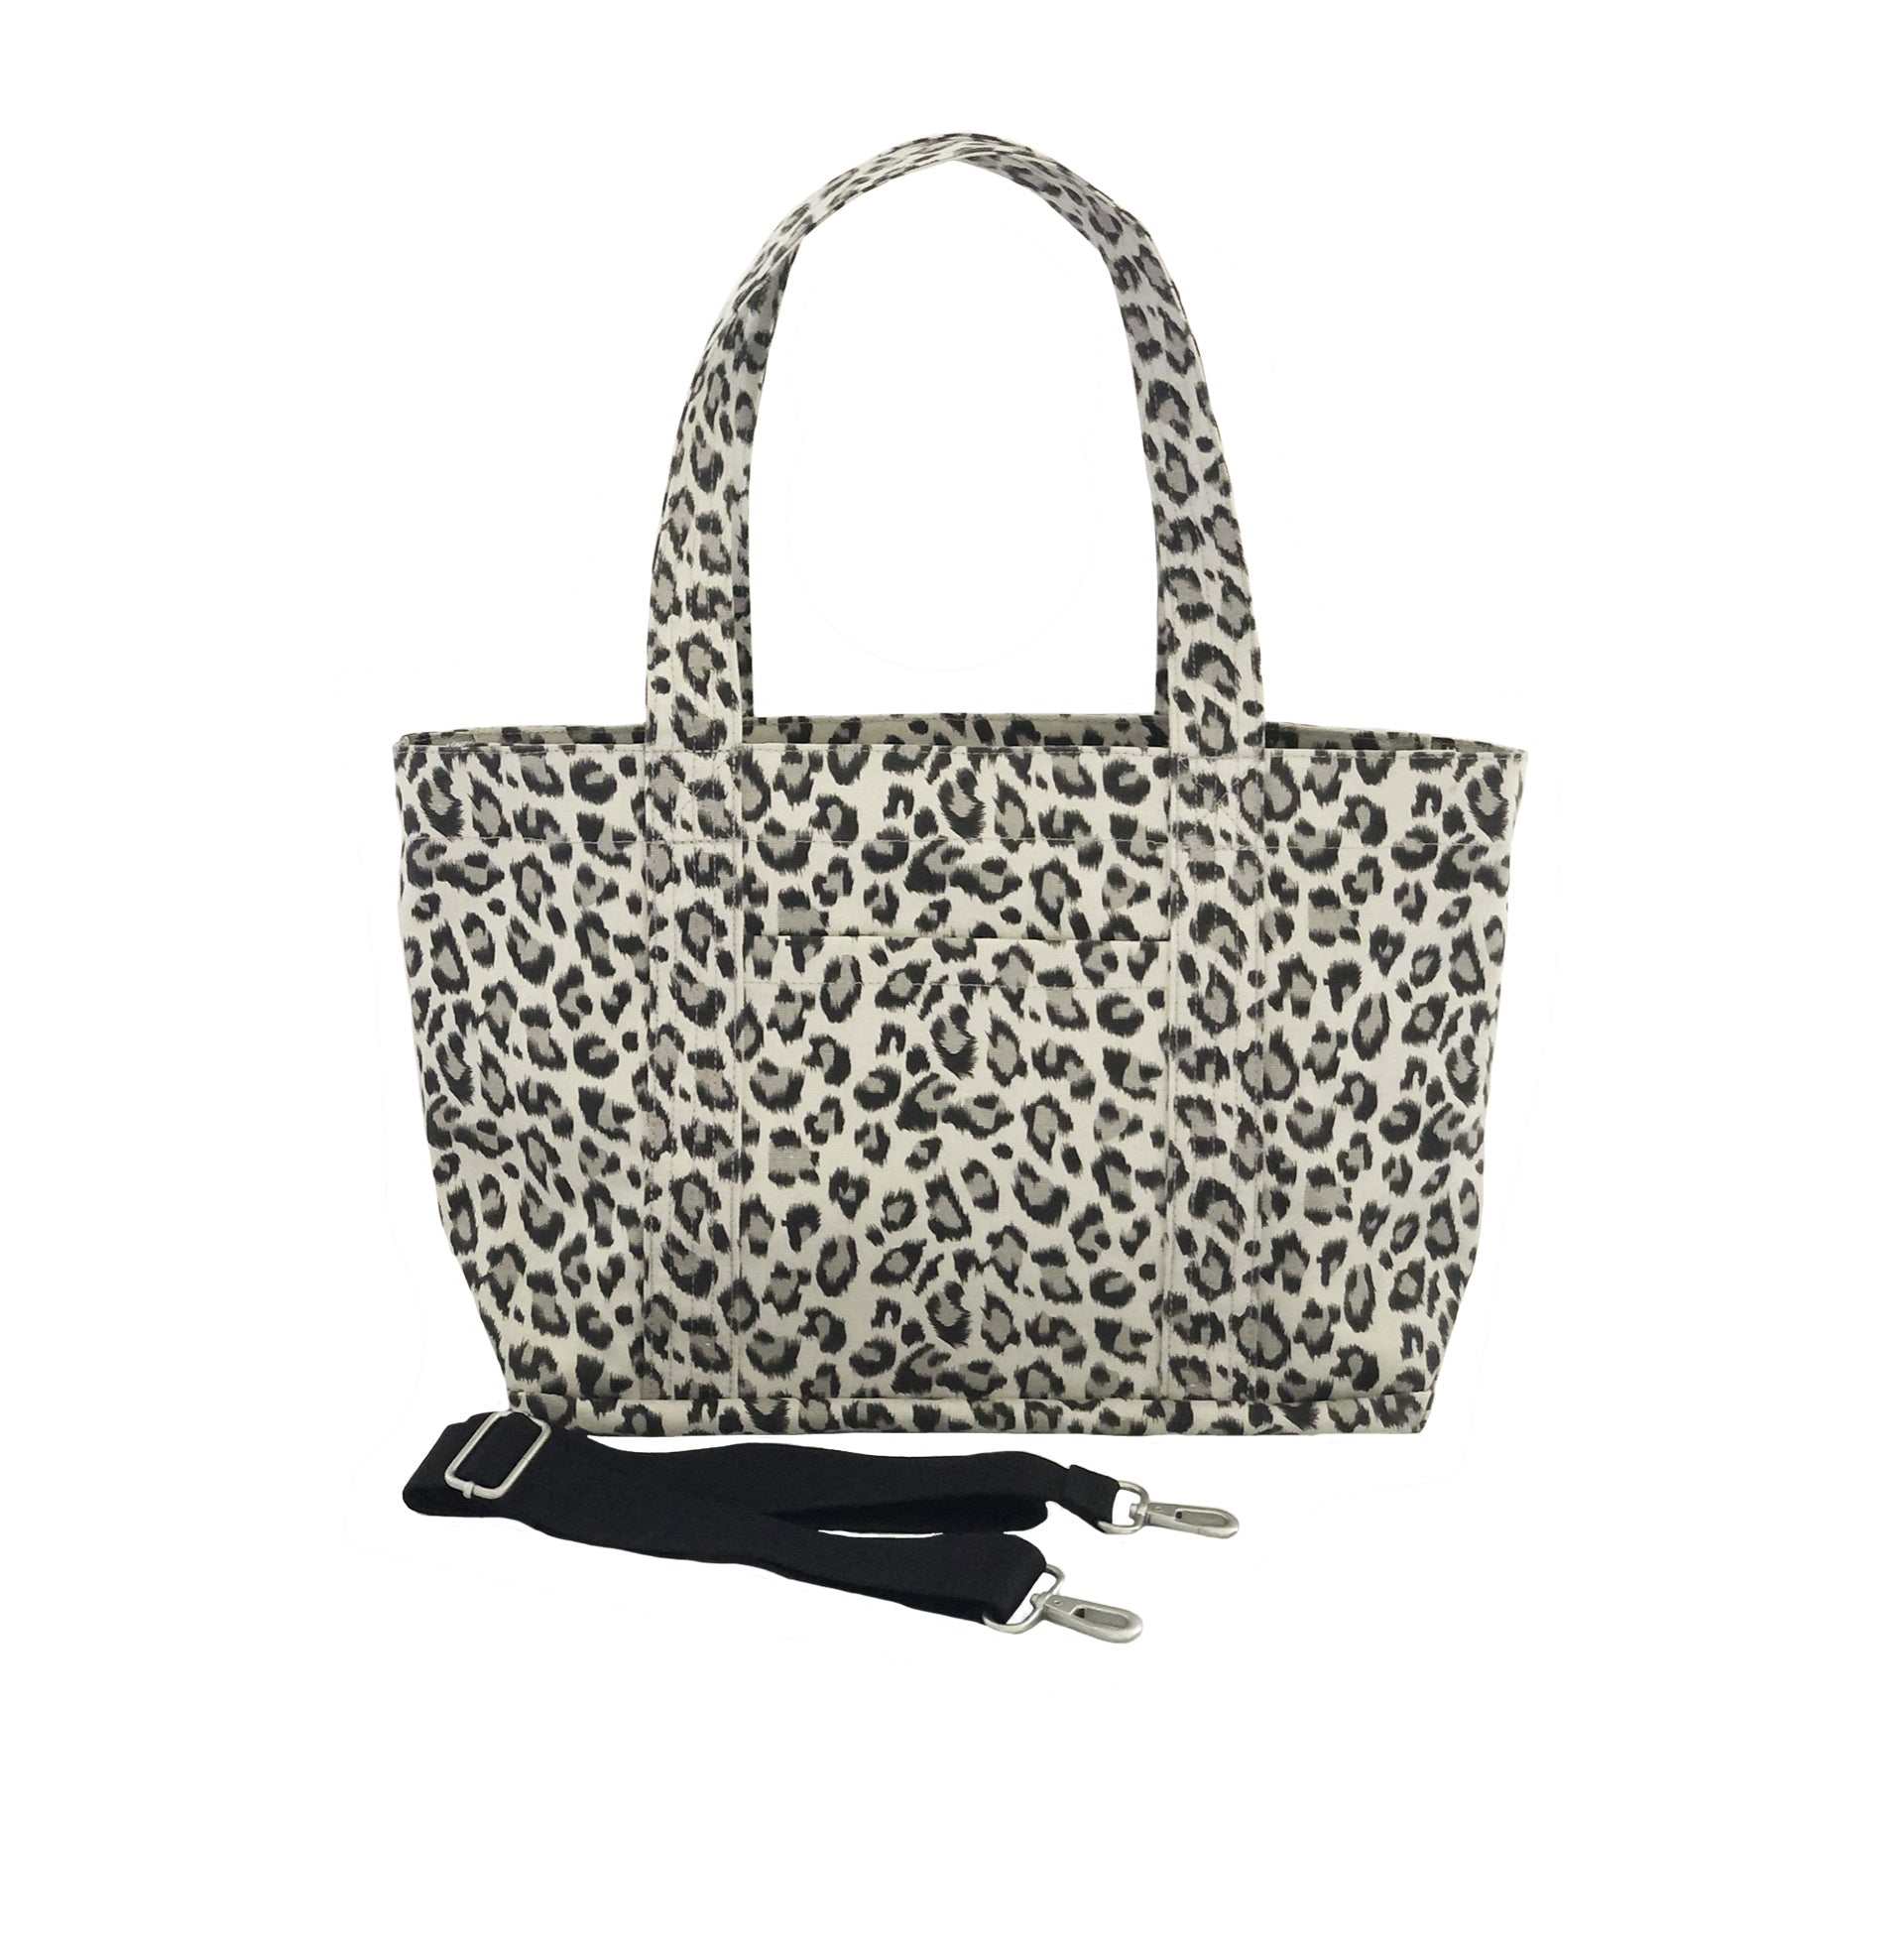 Monogram Stripe - Midi Zipper Tote: Leopard Just $78 with FREE LUXE STRAP - Quilted Koala